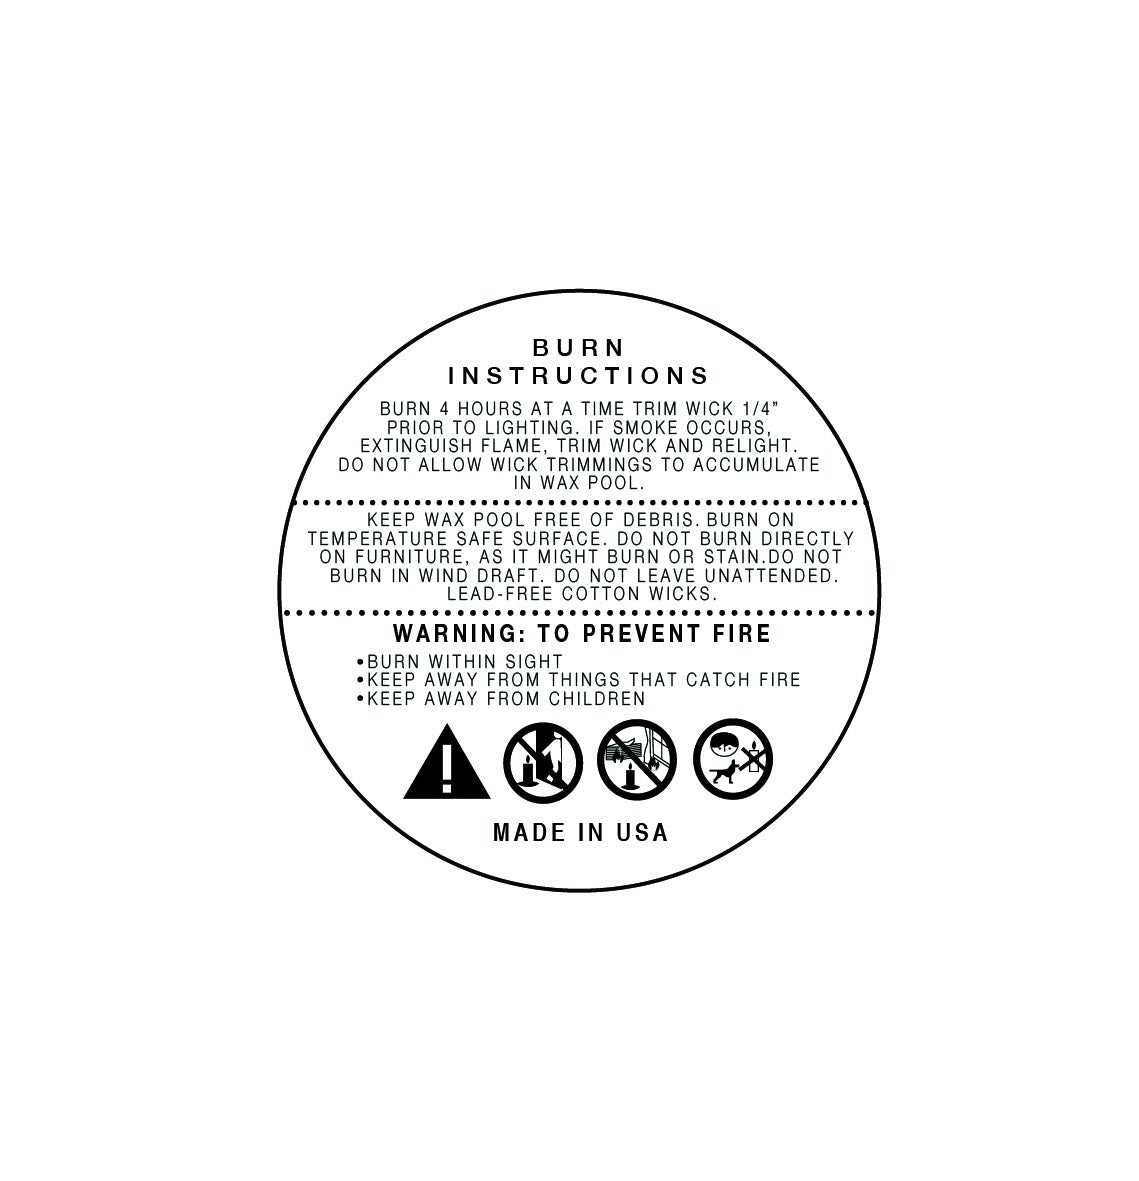 Candle Warning Label, Warning Label for Candles